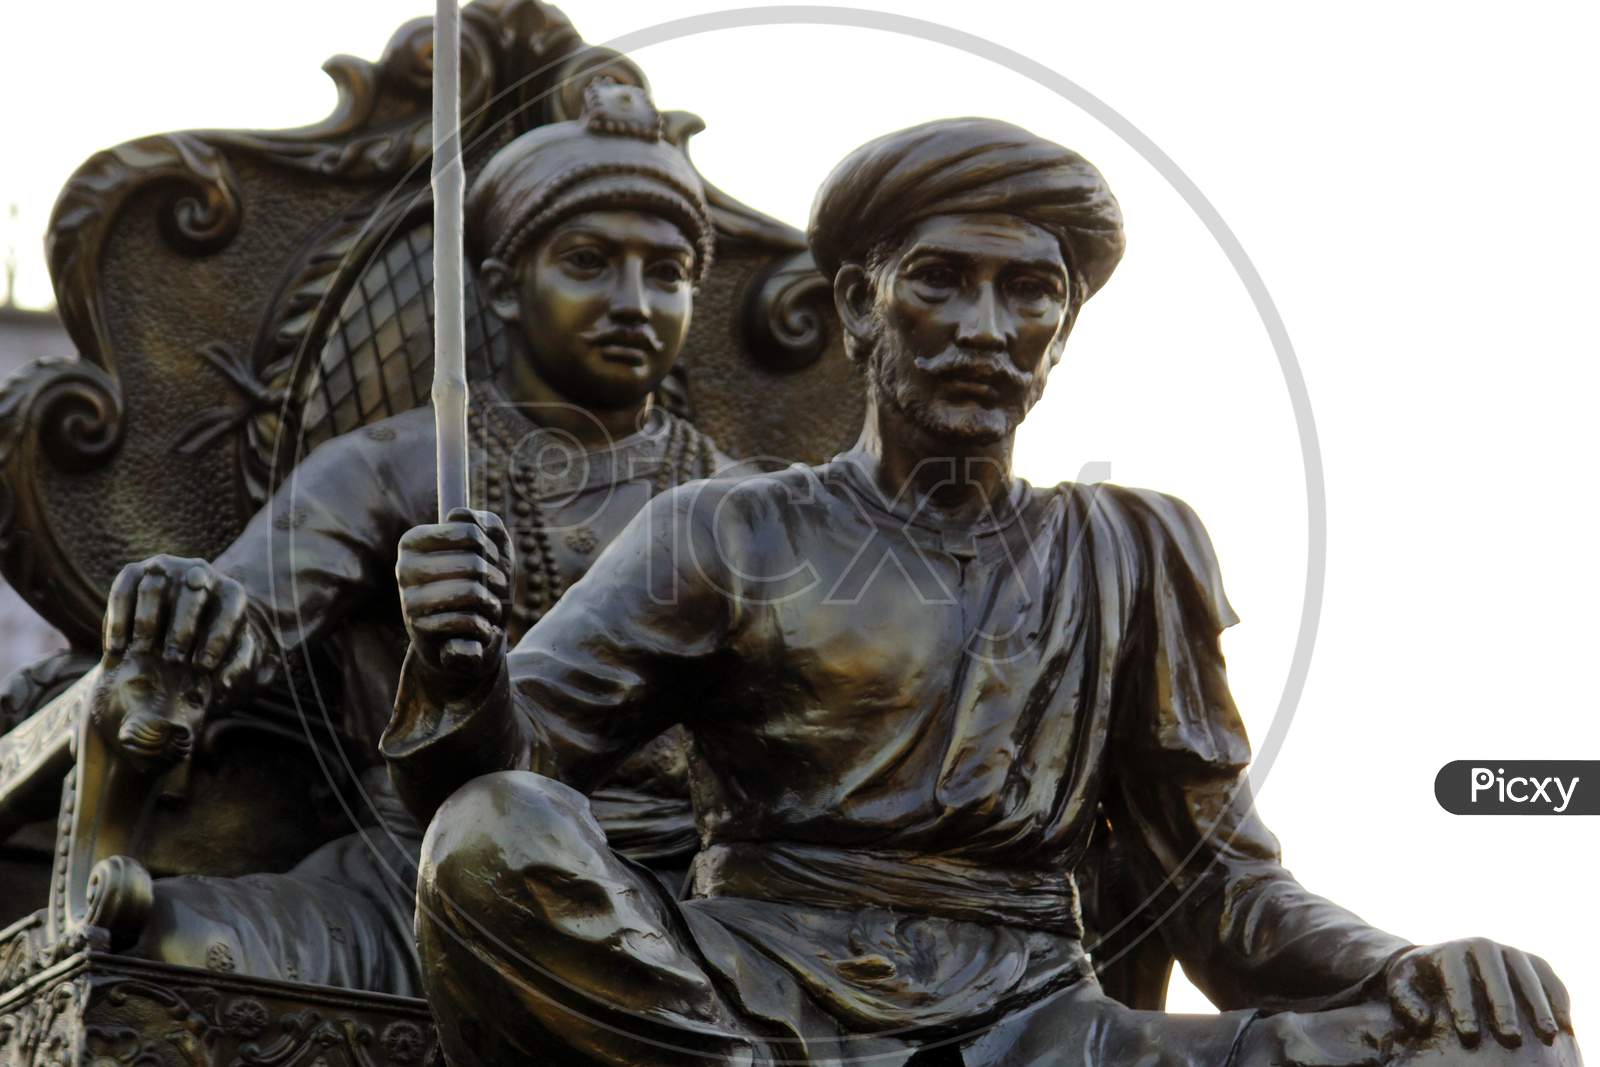 Indian historical King's sitting arrangements and rider's statue display with selective focus at "Shivaji Park" on ,Barasat, North 24 Parganas.